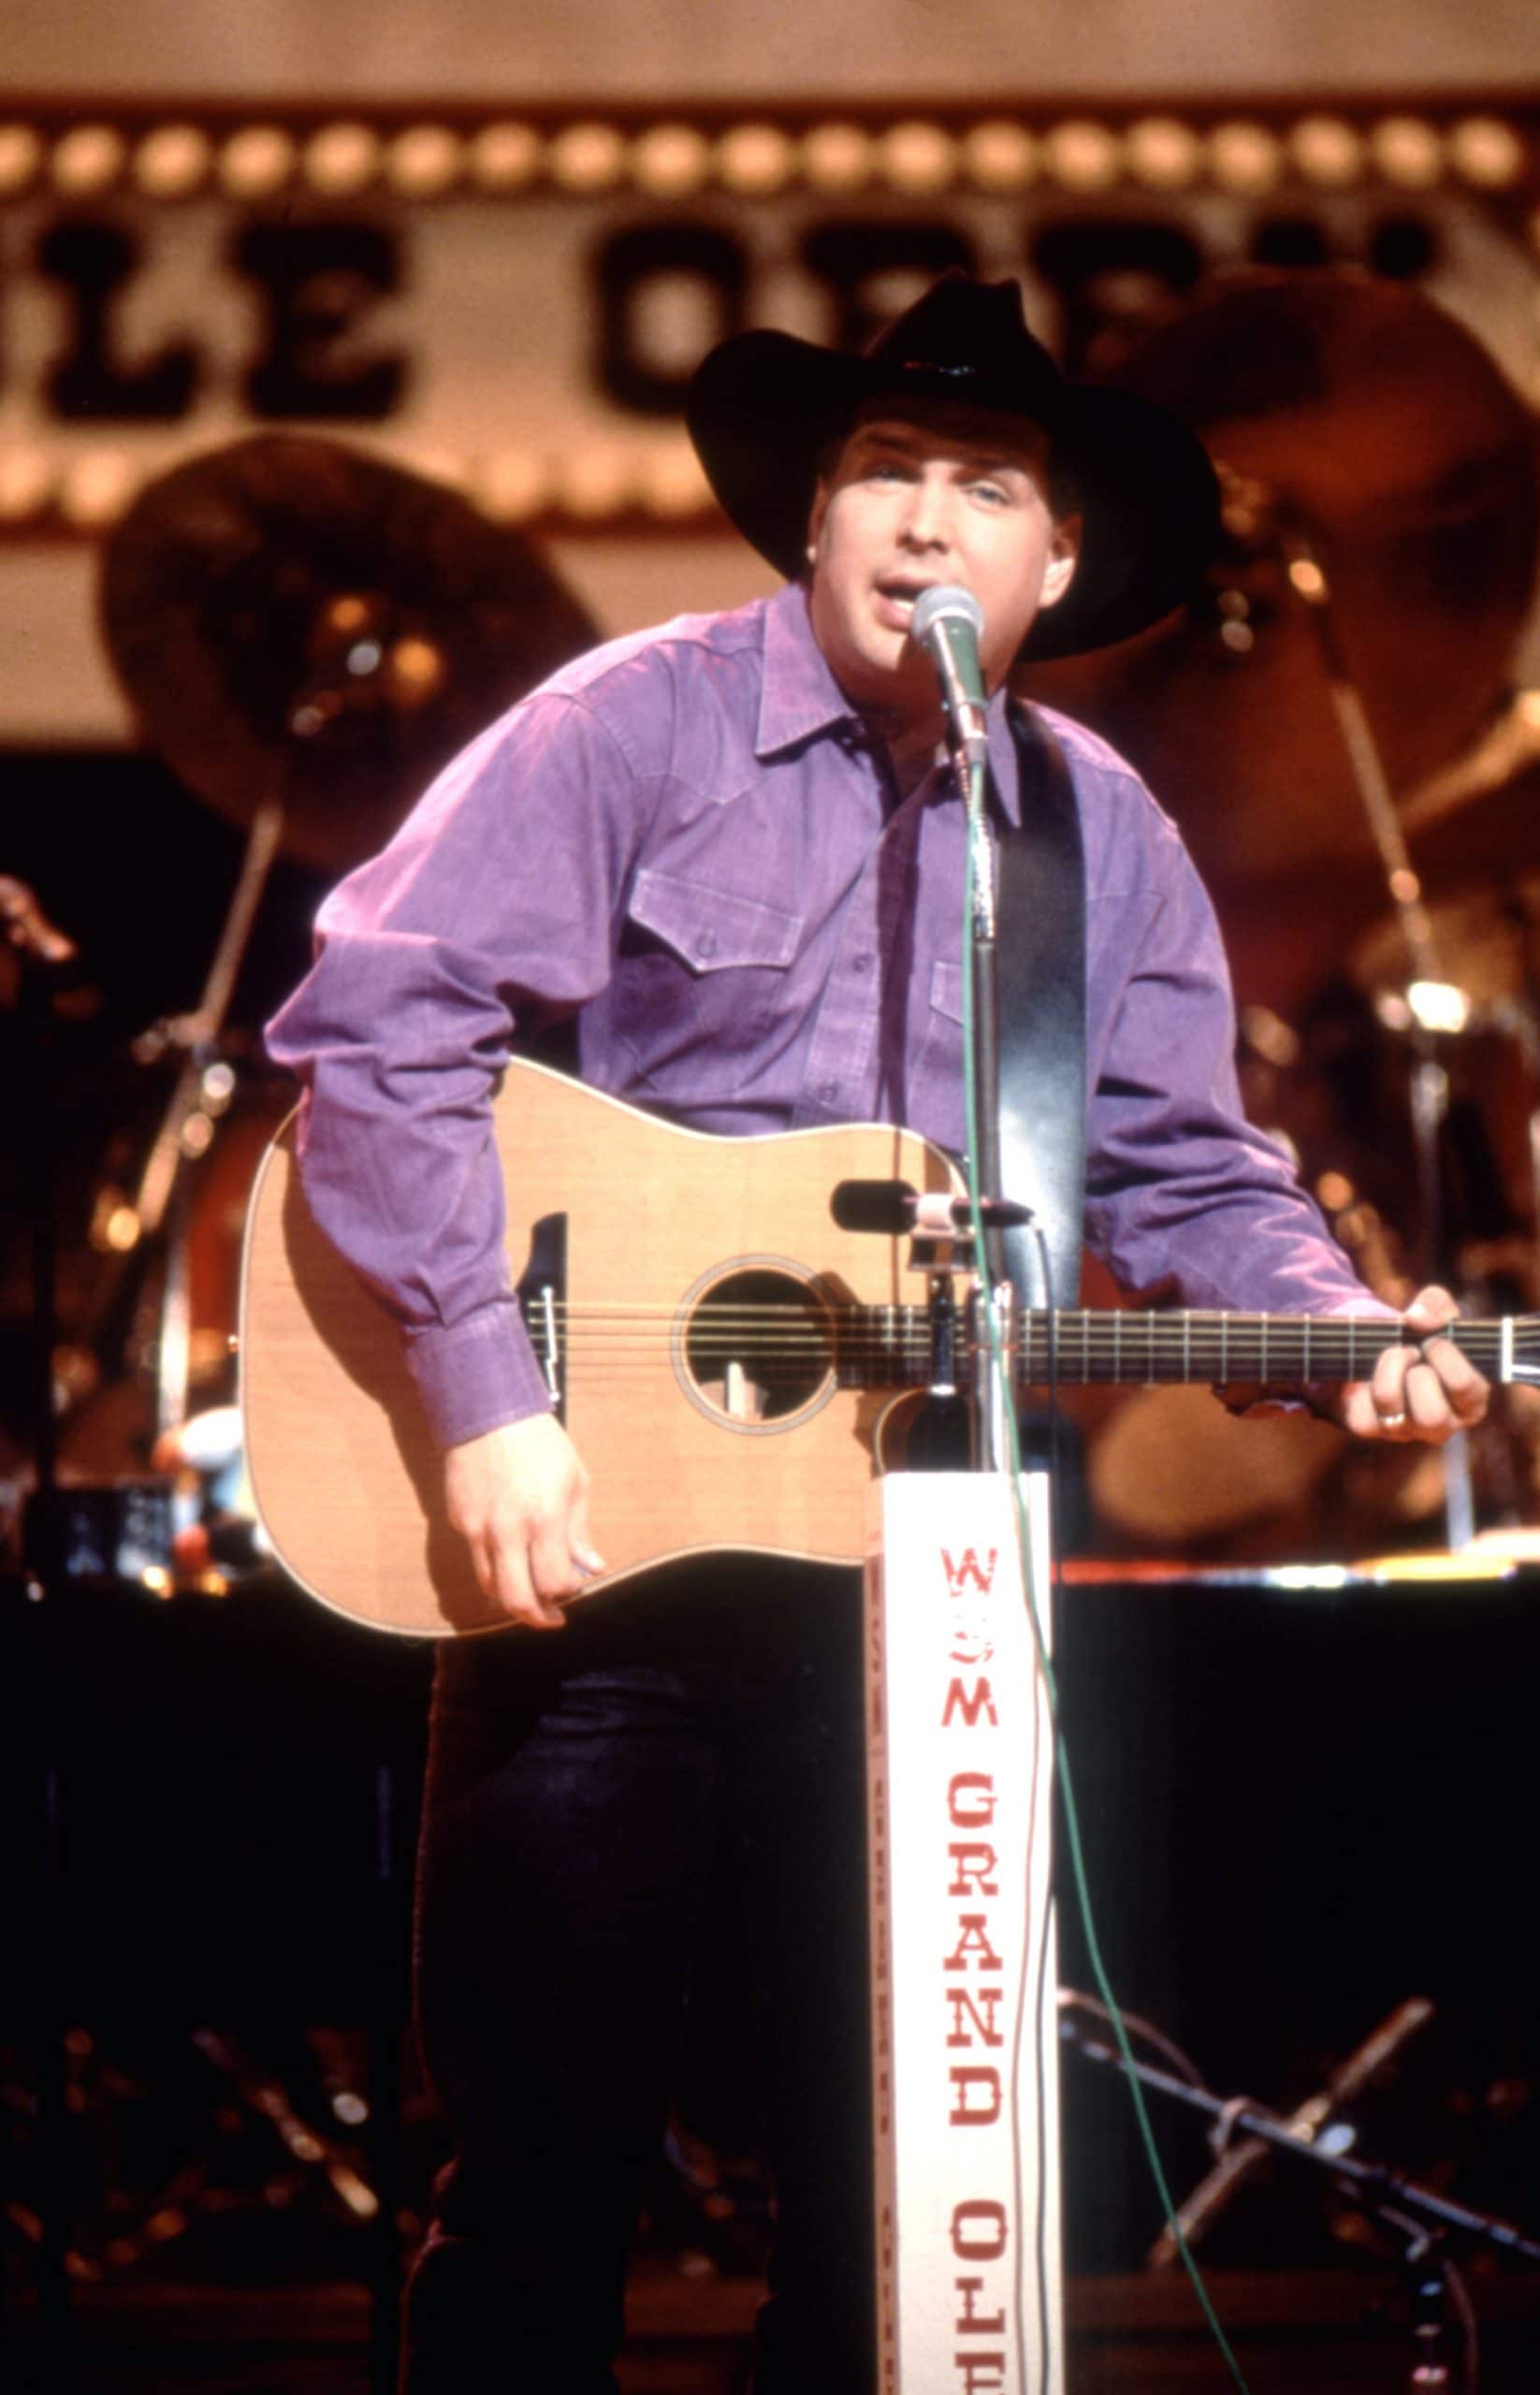 Garth Brooks performing at the Grand Ole Opry